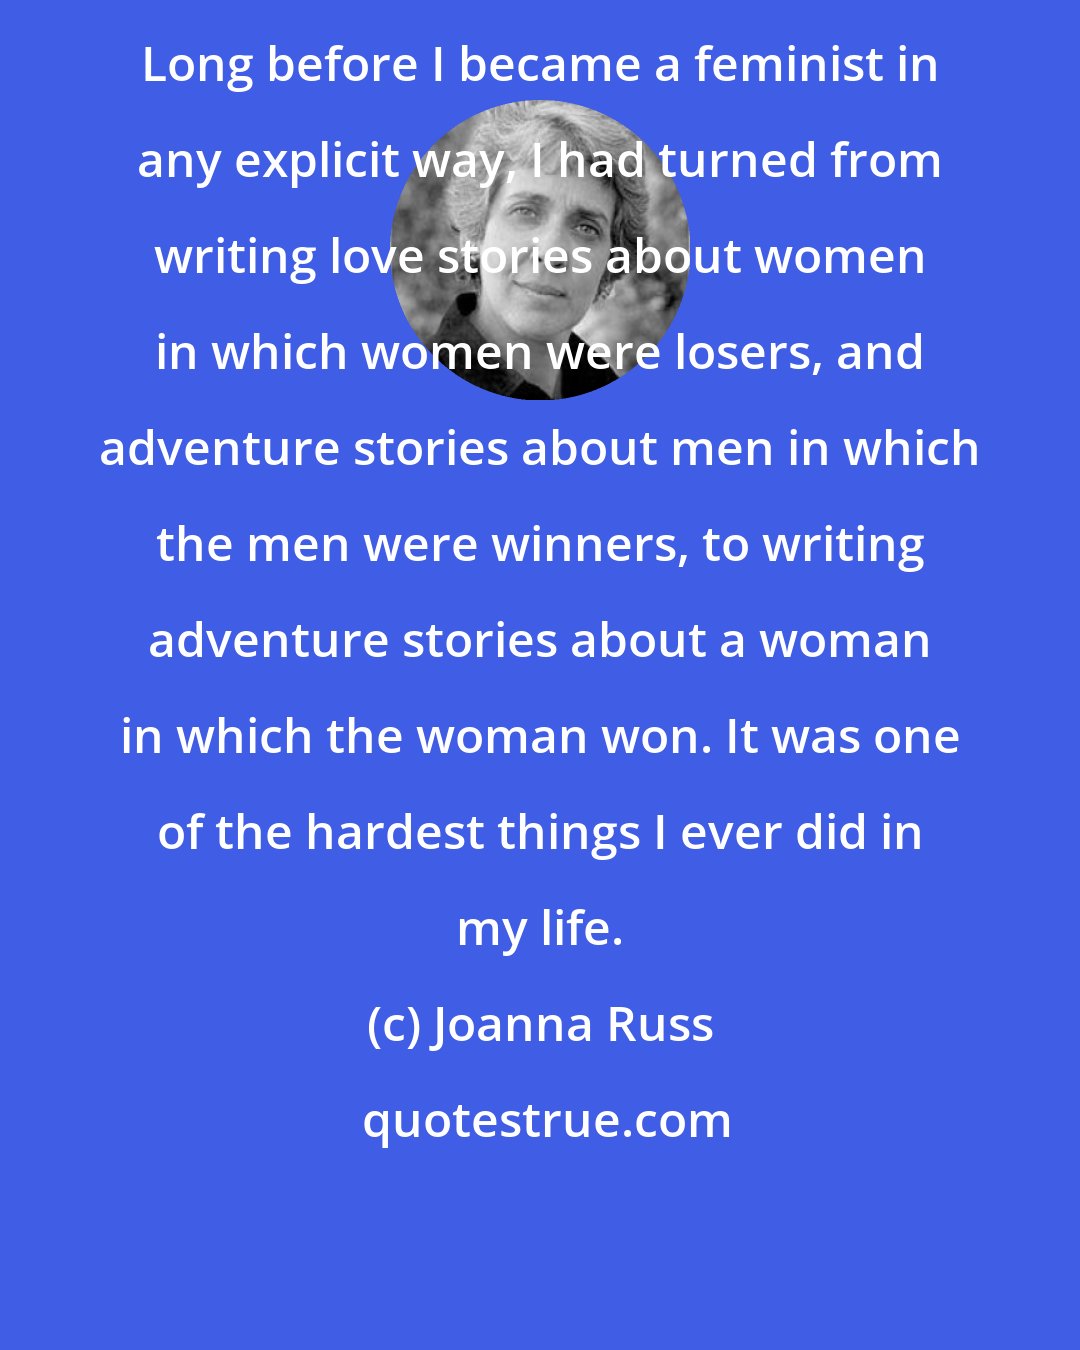 Joanna Russ: Long before I became a feminist in any explicit way, I had turned from writing love stories about women in which women were losers, and adventure stories about men in which the men were winners, to writing adventure stories about a woman in which the woman won. It was one of the hardest things I ever did in my life.